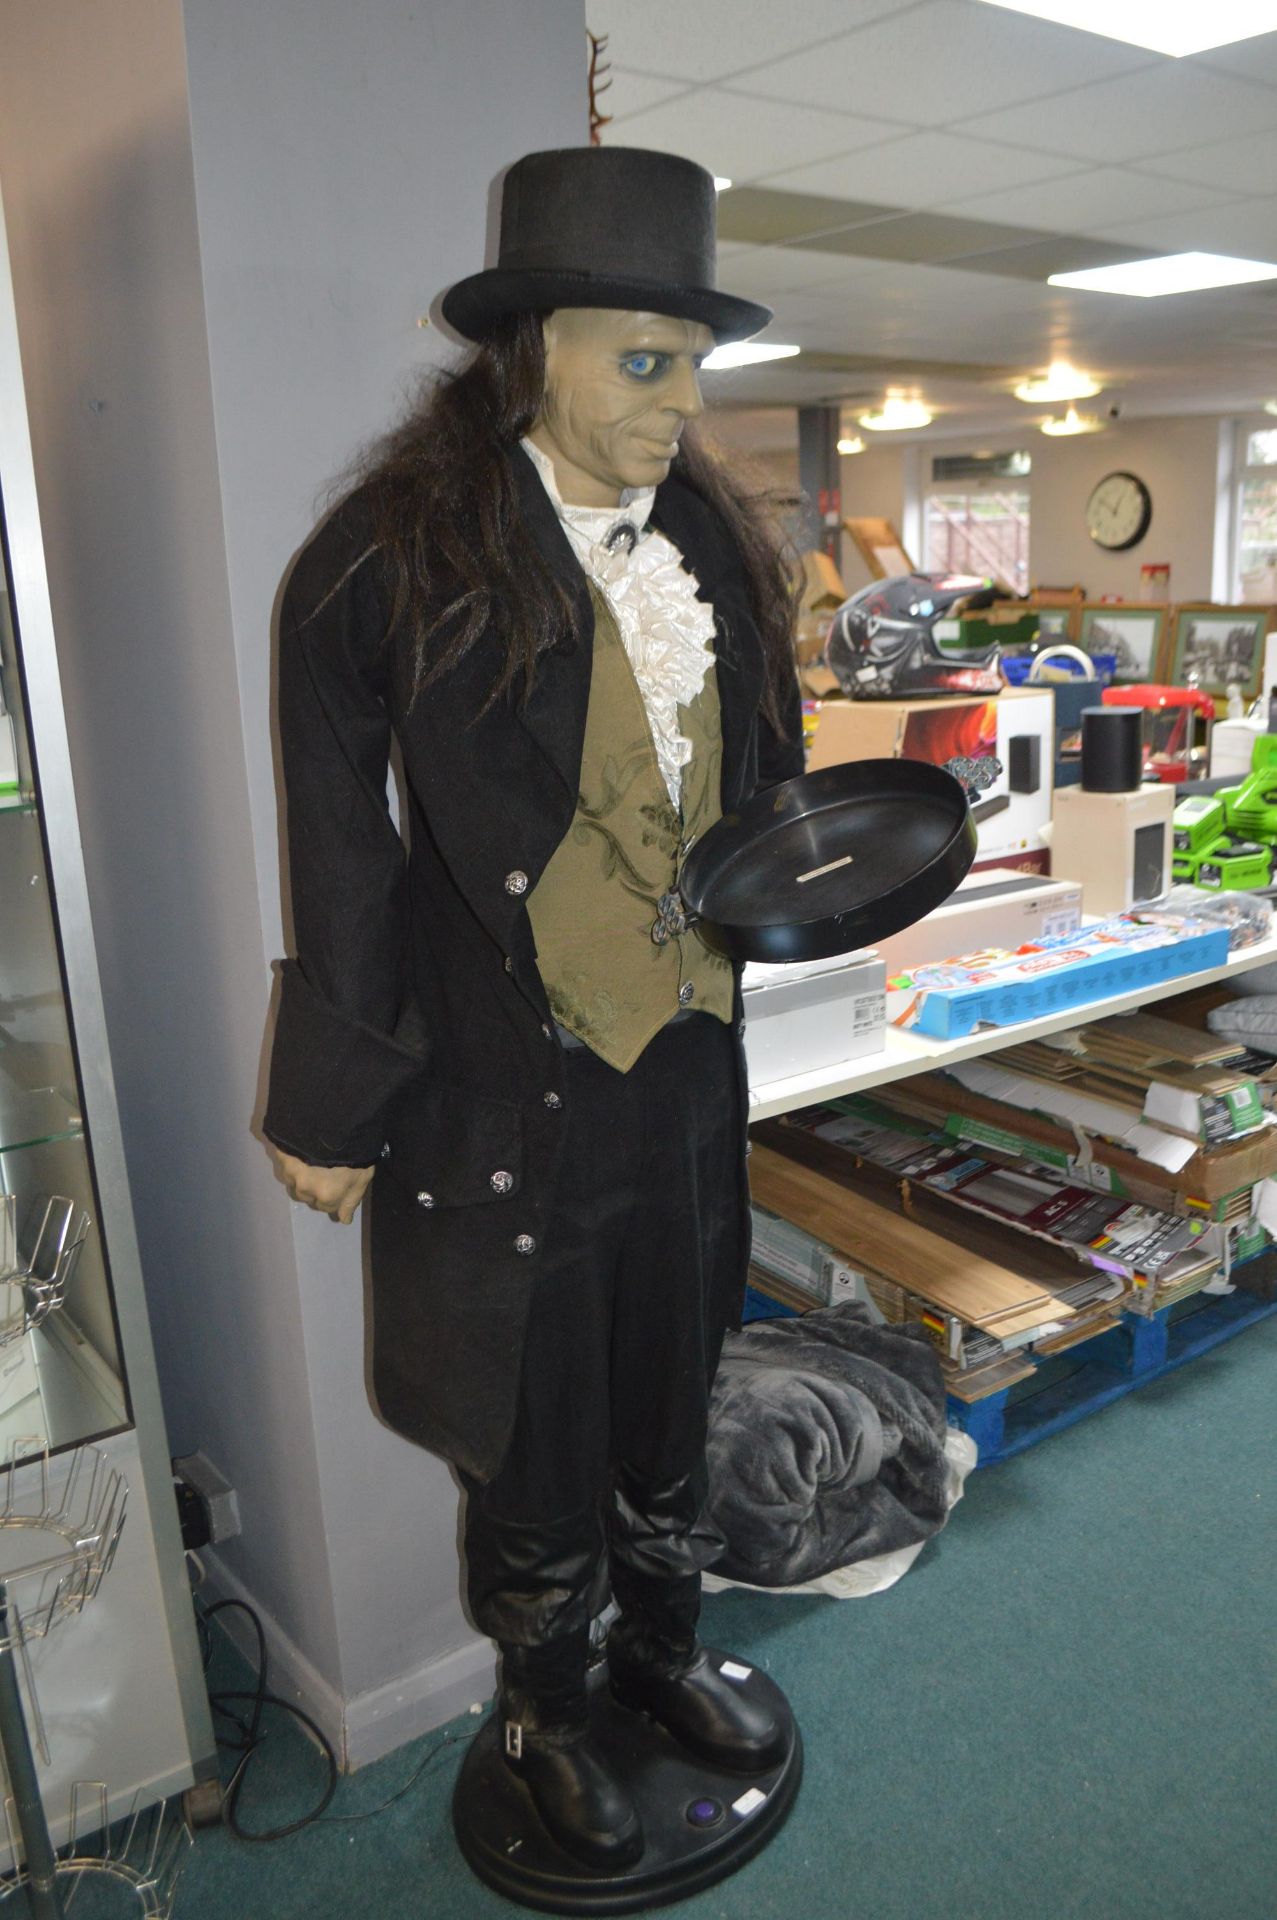 Life Sized Animated Talking Spooky Butler - Image 3 of 4